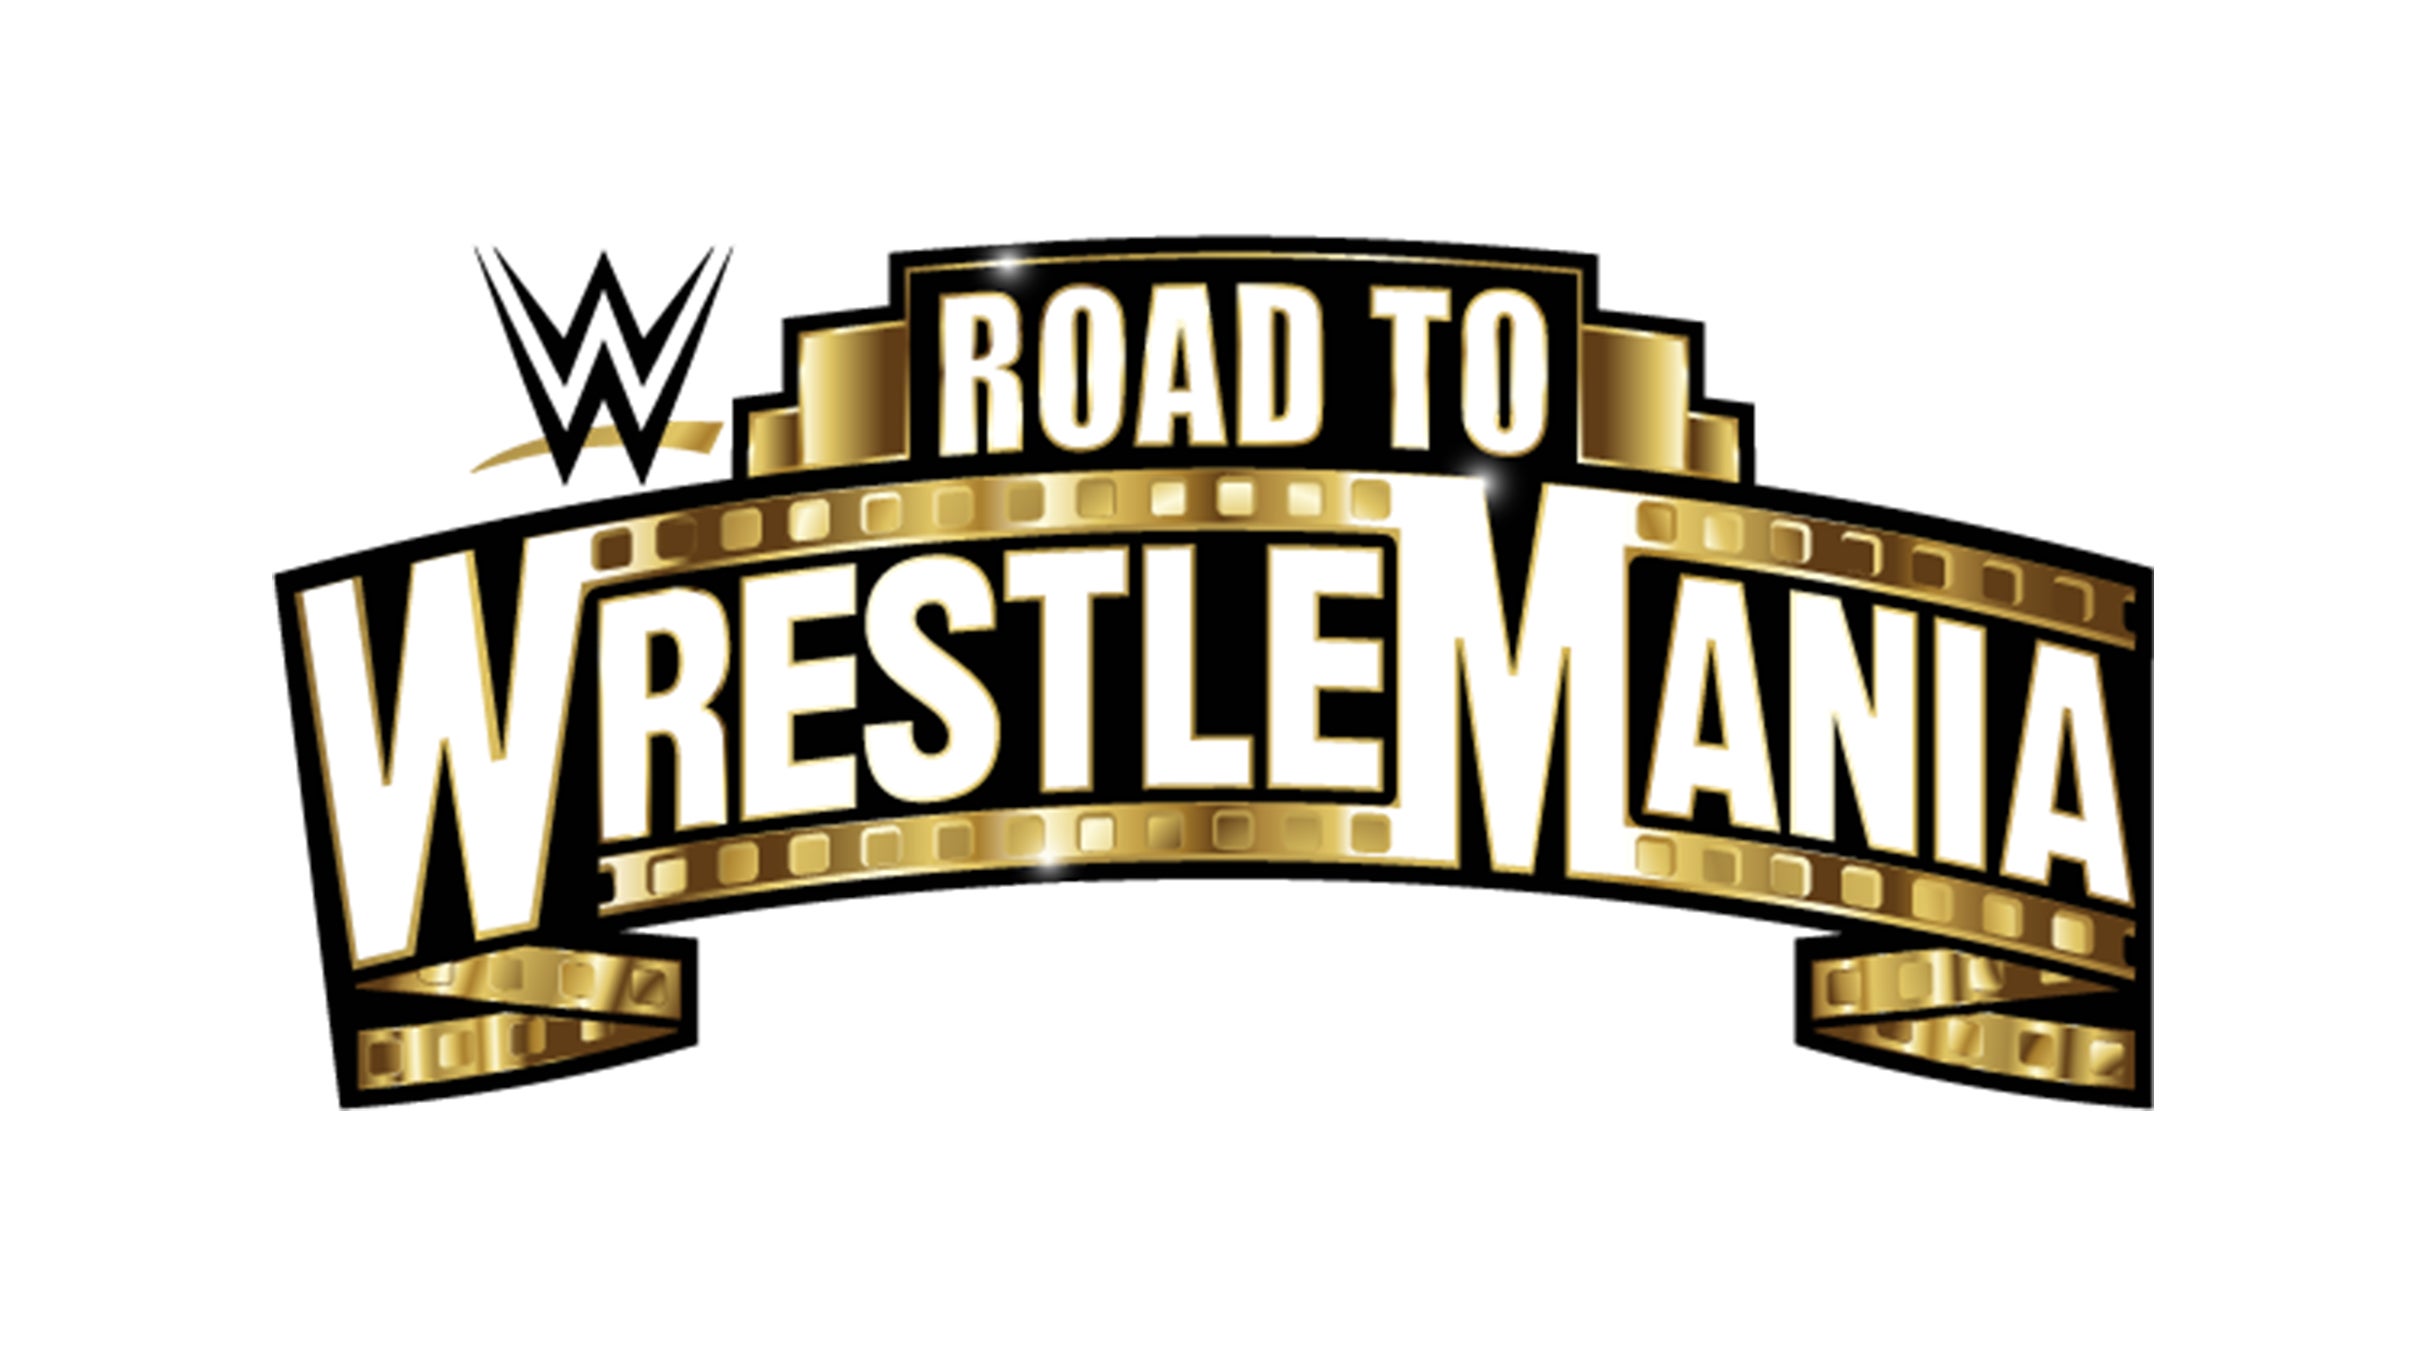 WWE Road To WrestleMania Results (02/26): Rockford, Illinois